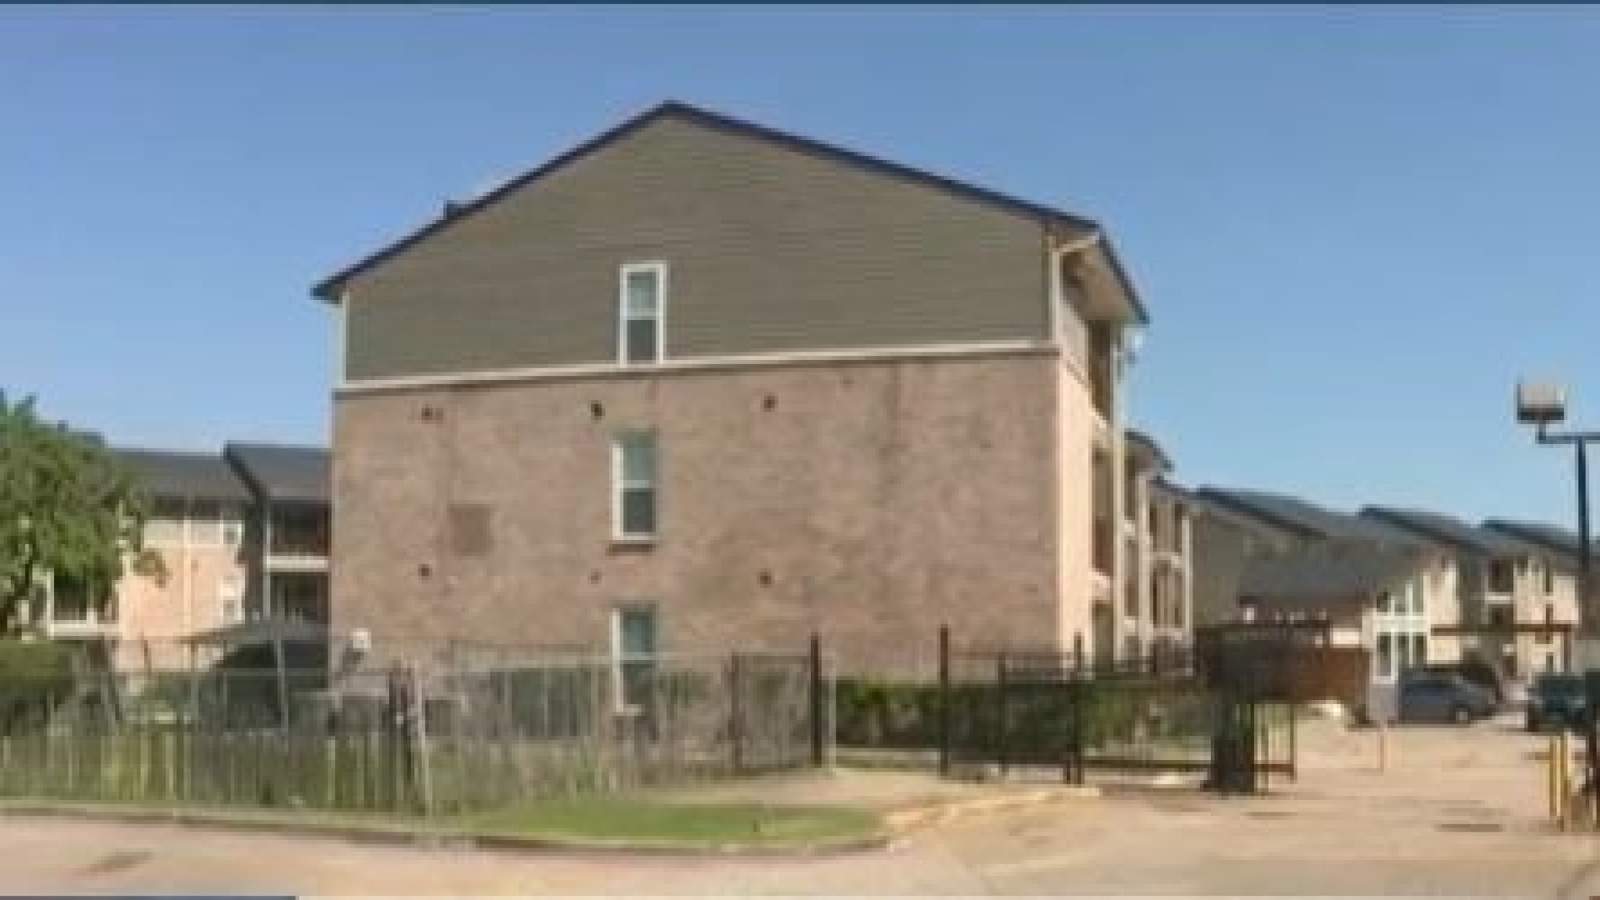 2 new testing sites at Sunnyside apartments opening Thursday